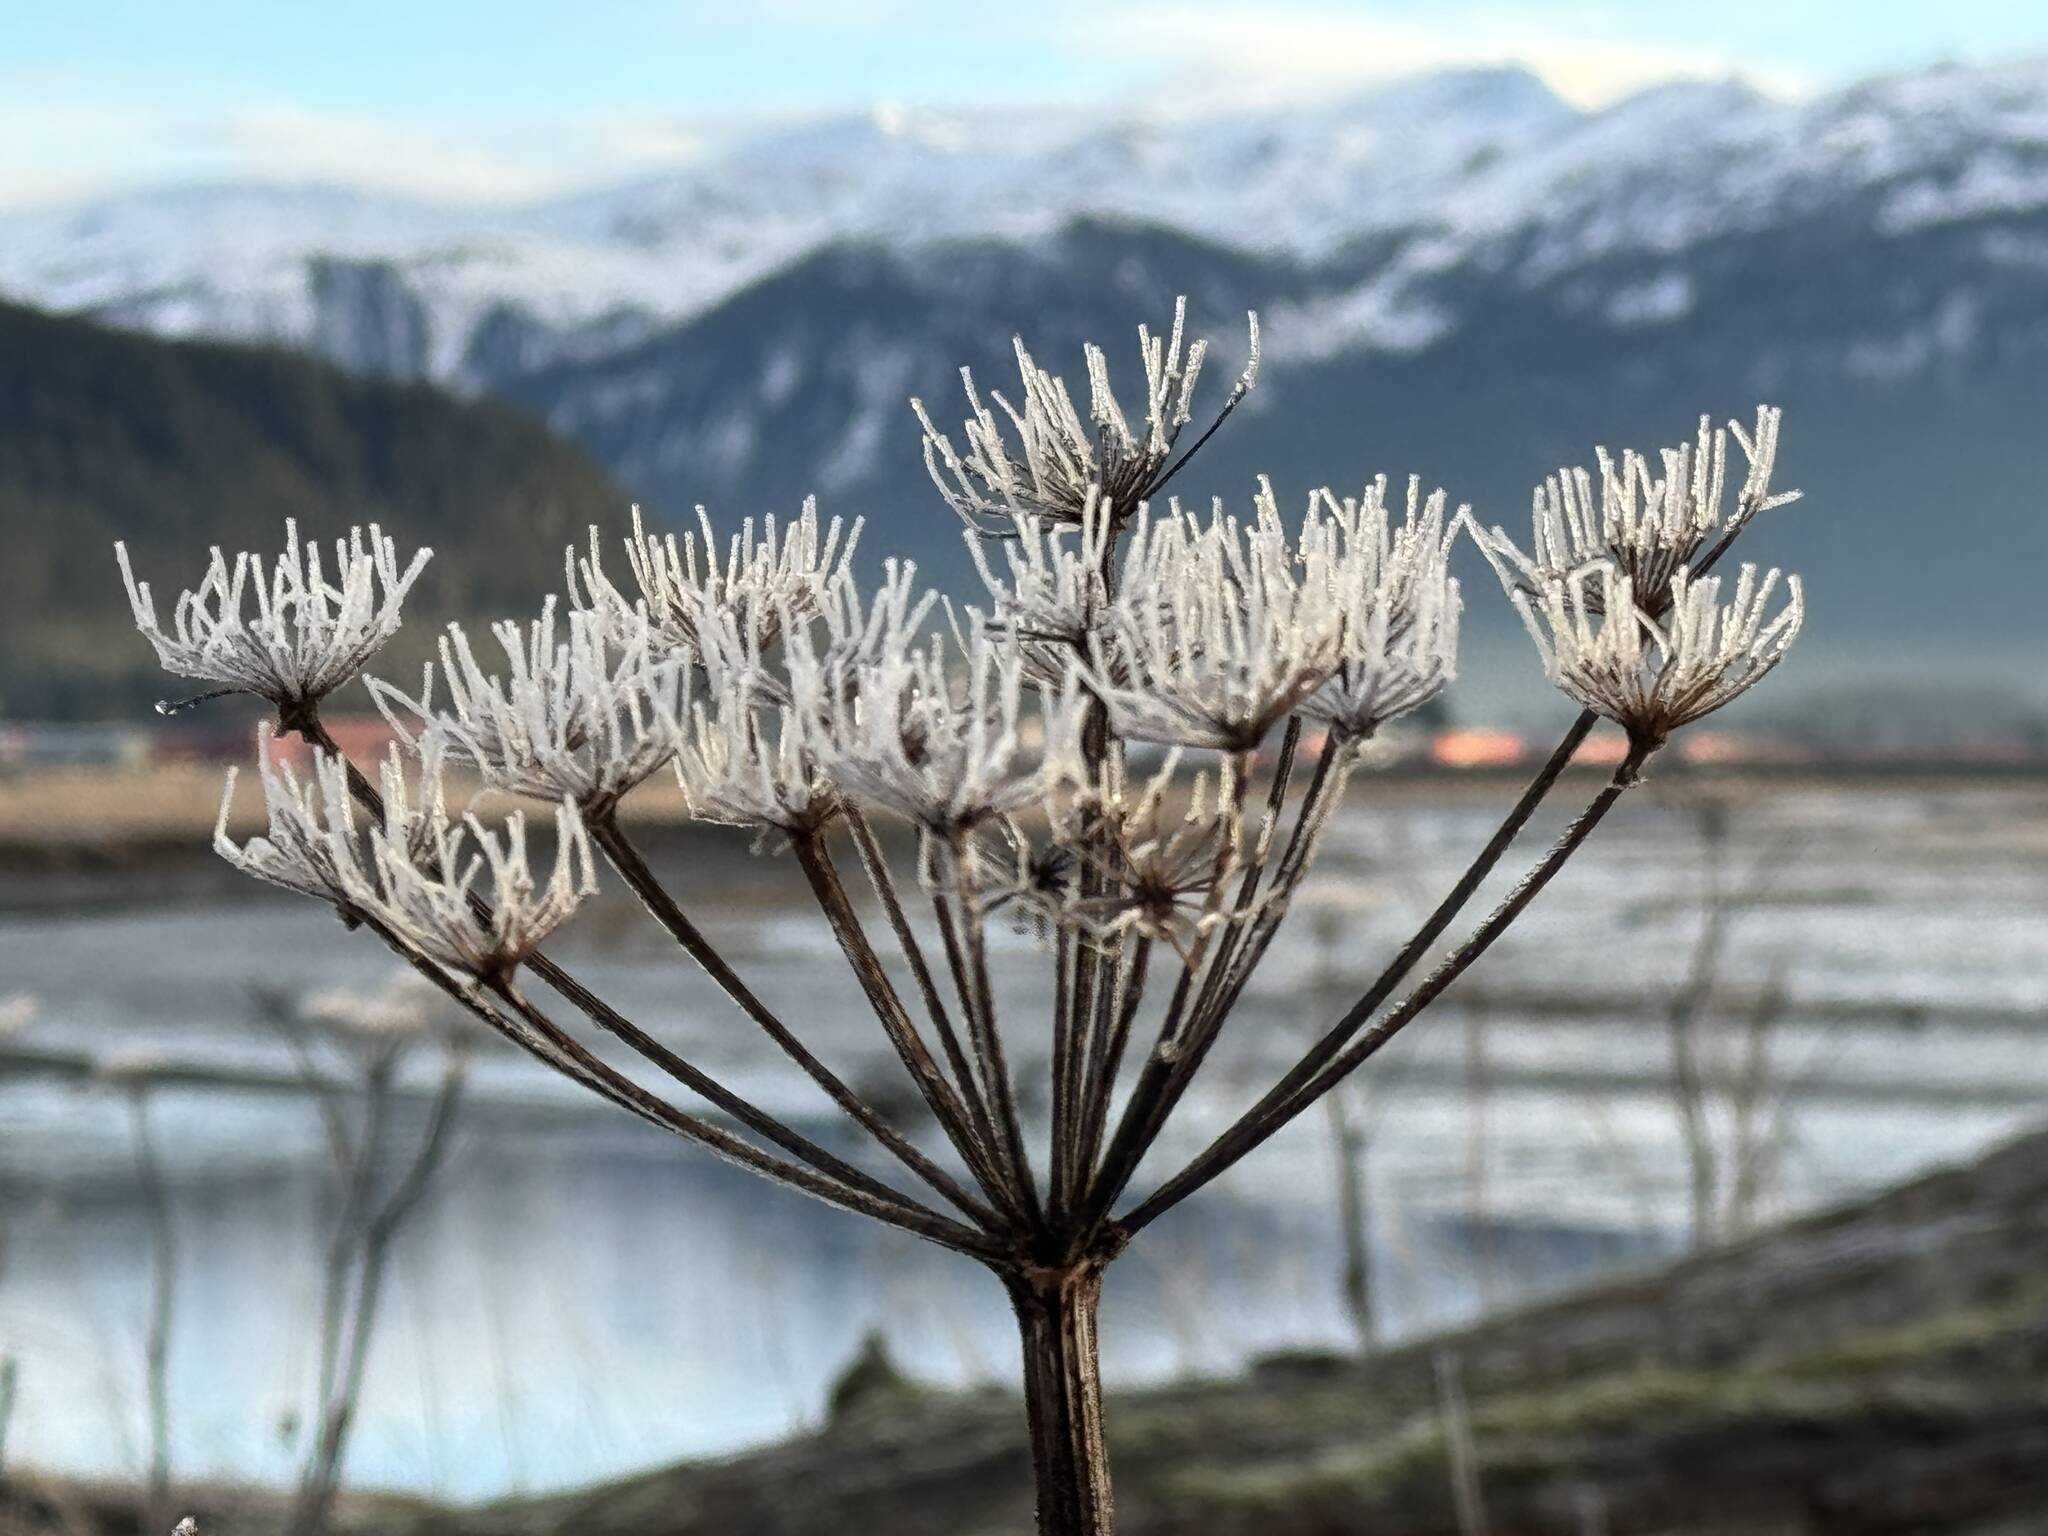 Cow parsnip along the Mendenhall Wetlands Trail on Dec. 2. (Photo by Deana Barajas)